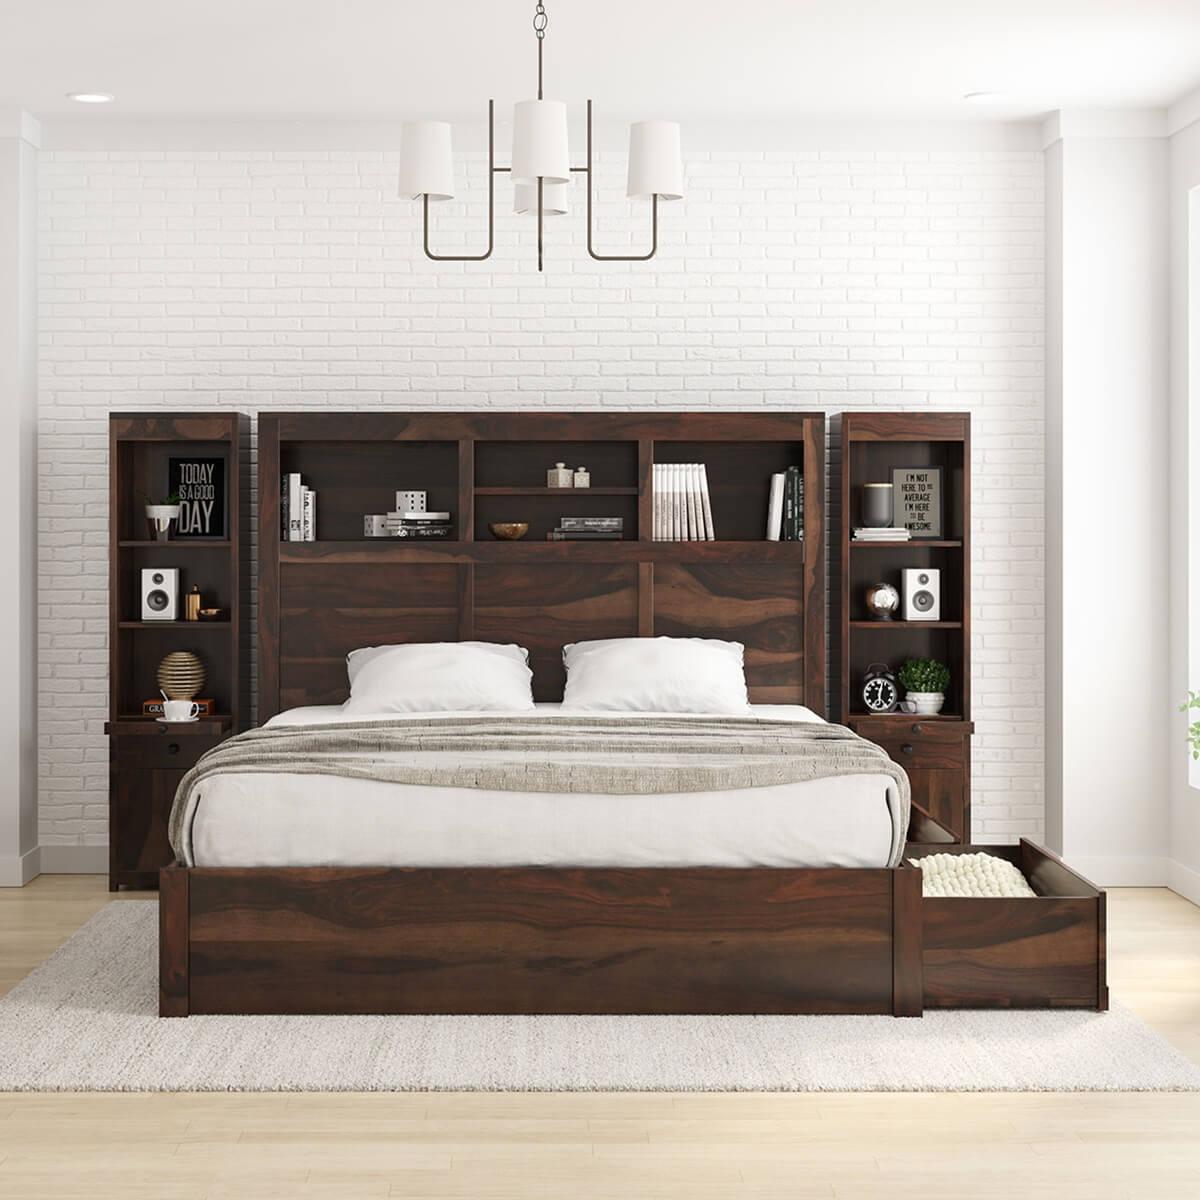 How To Attach A Headboard Any Bed, Freestanding Headboard Queen